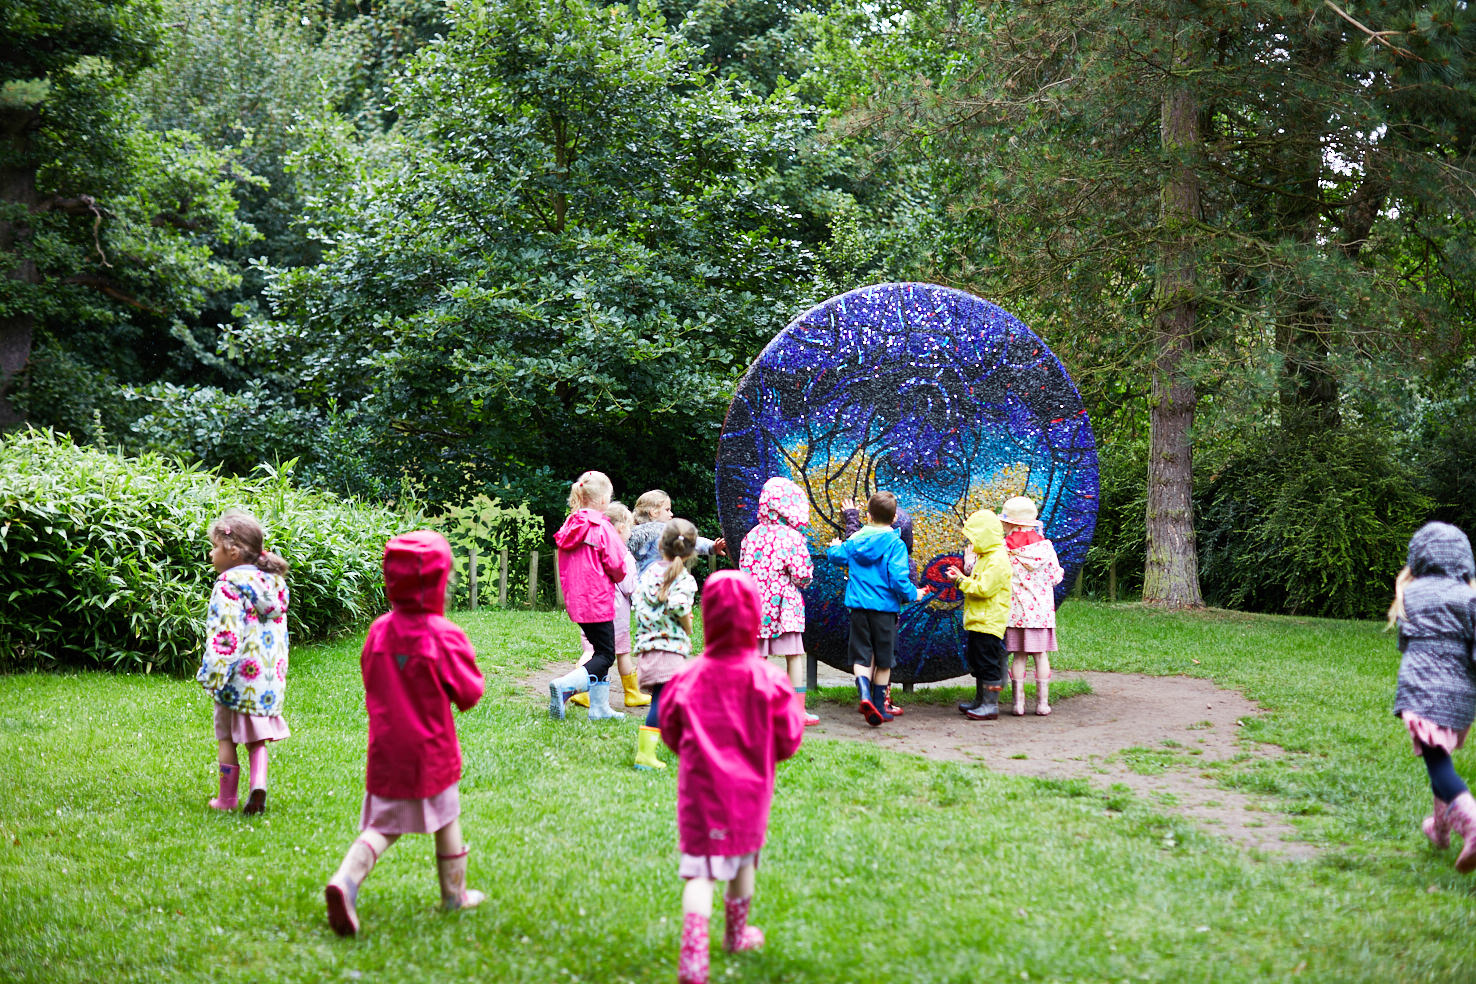 A large group of young children admiring and touching a textured sculpture in the rain.